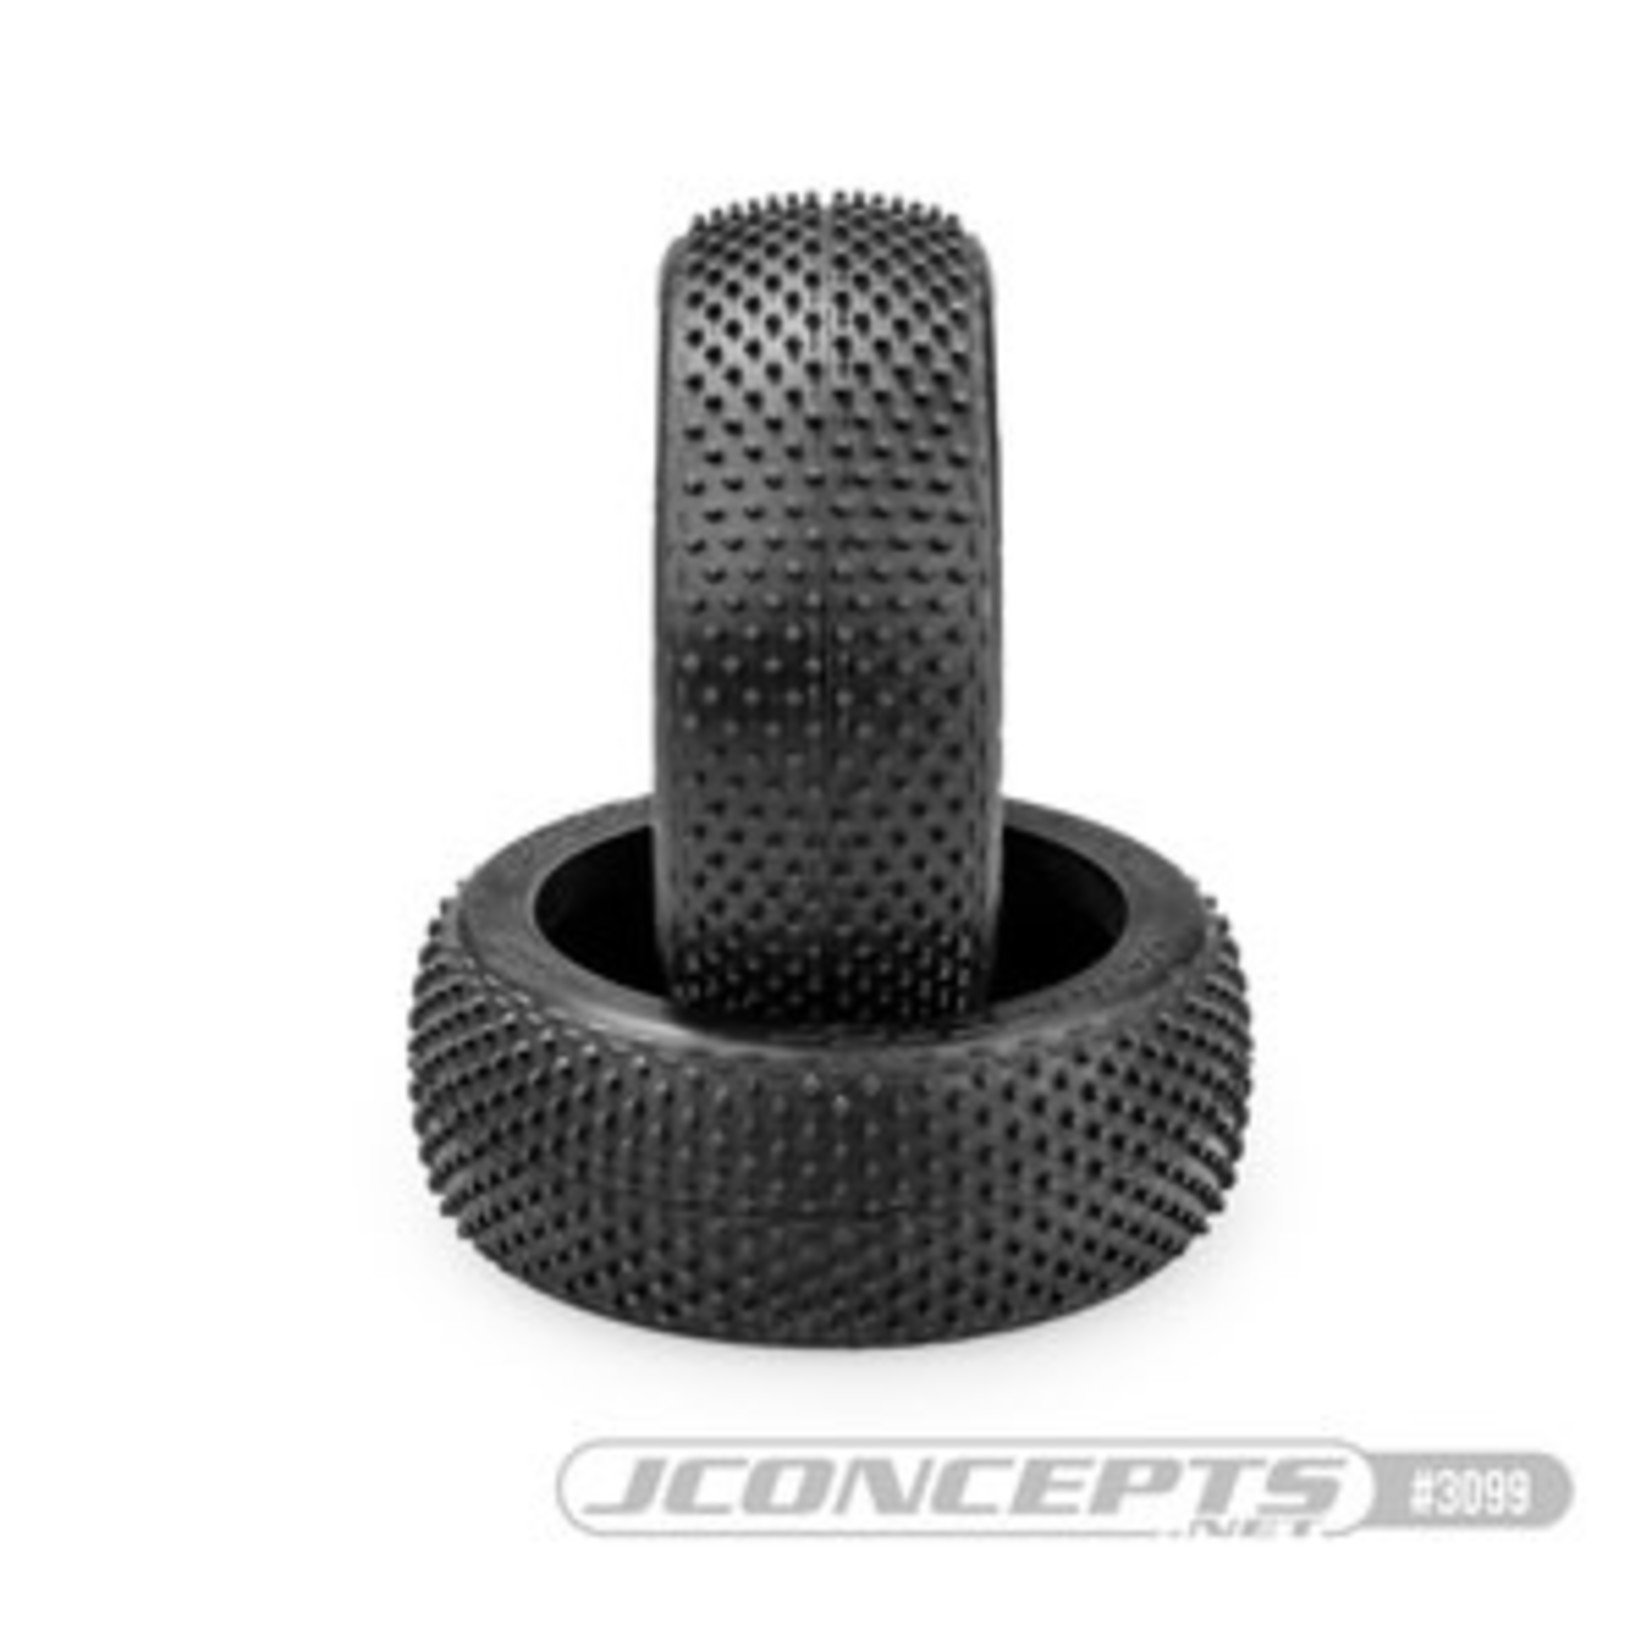 JConcepts Nessi, Pink Compound, Fits 83mm 1/8th Buggy Wheel